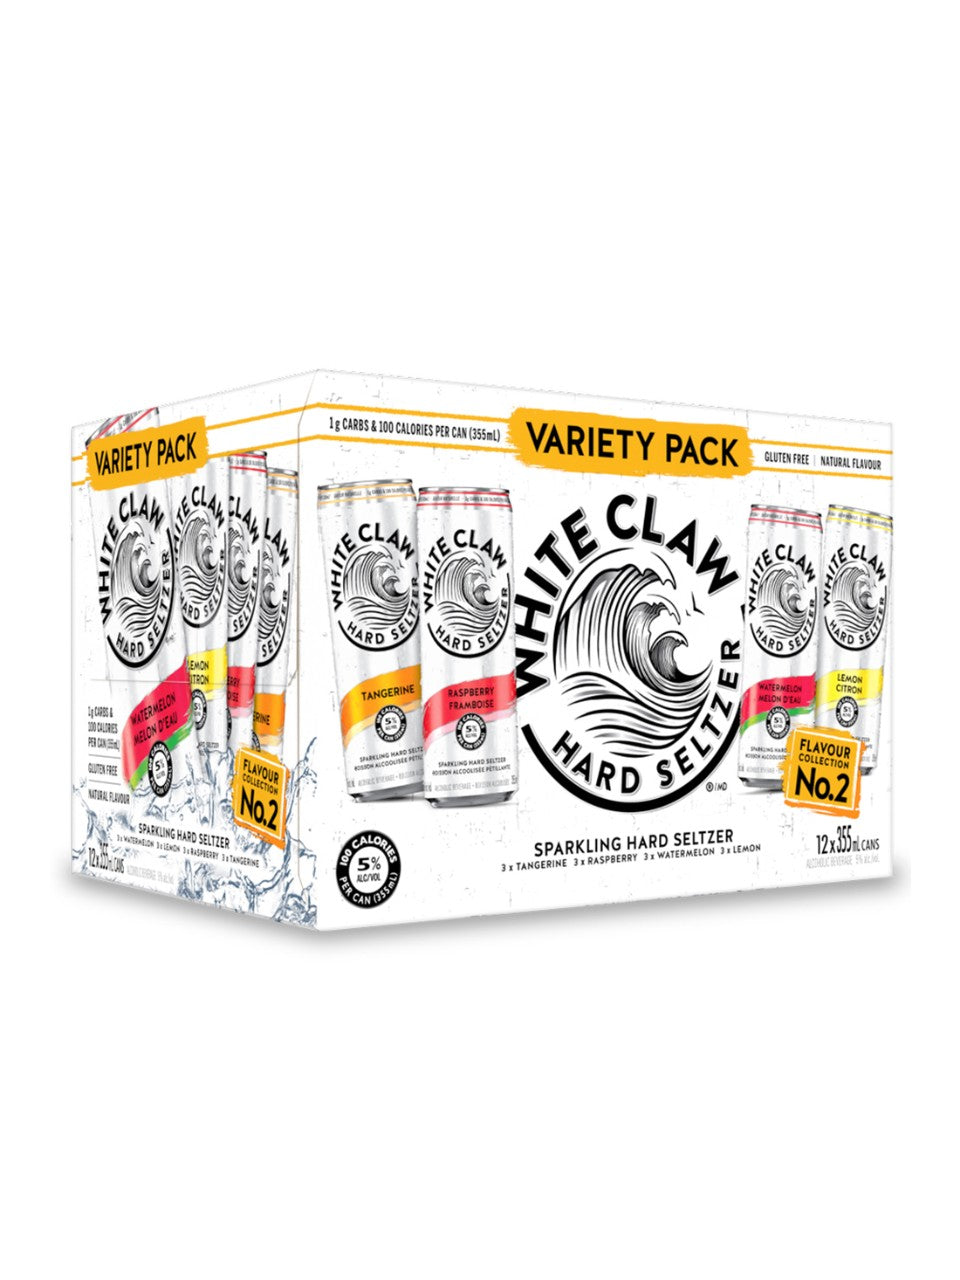 White Claw Variety Pack #2  12 x 355 mL can